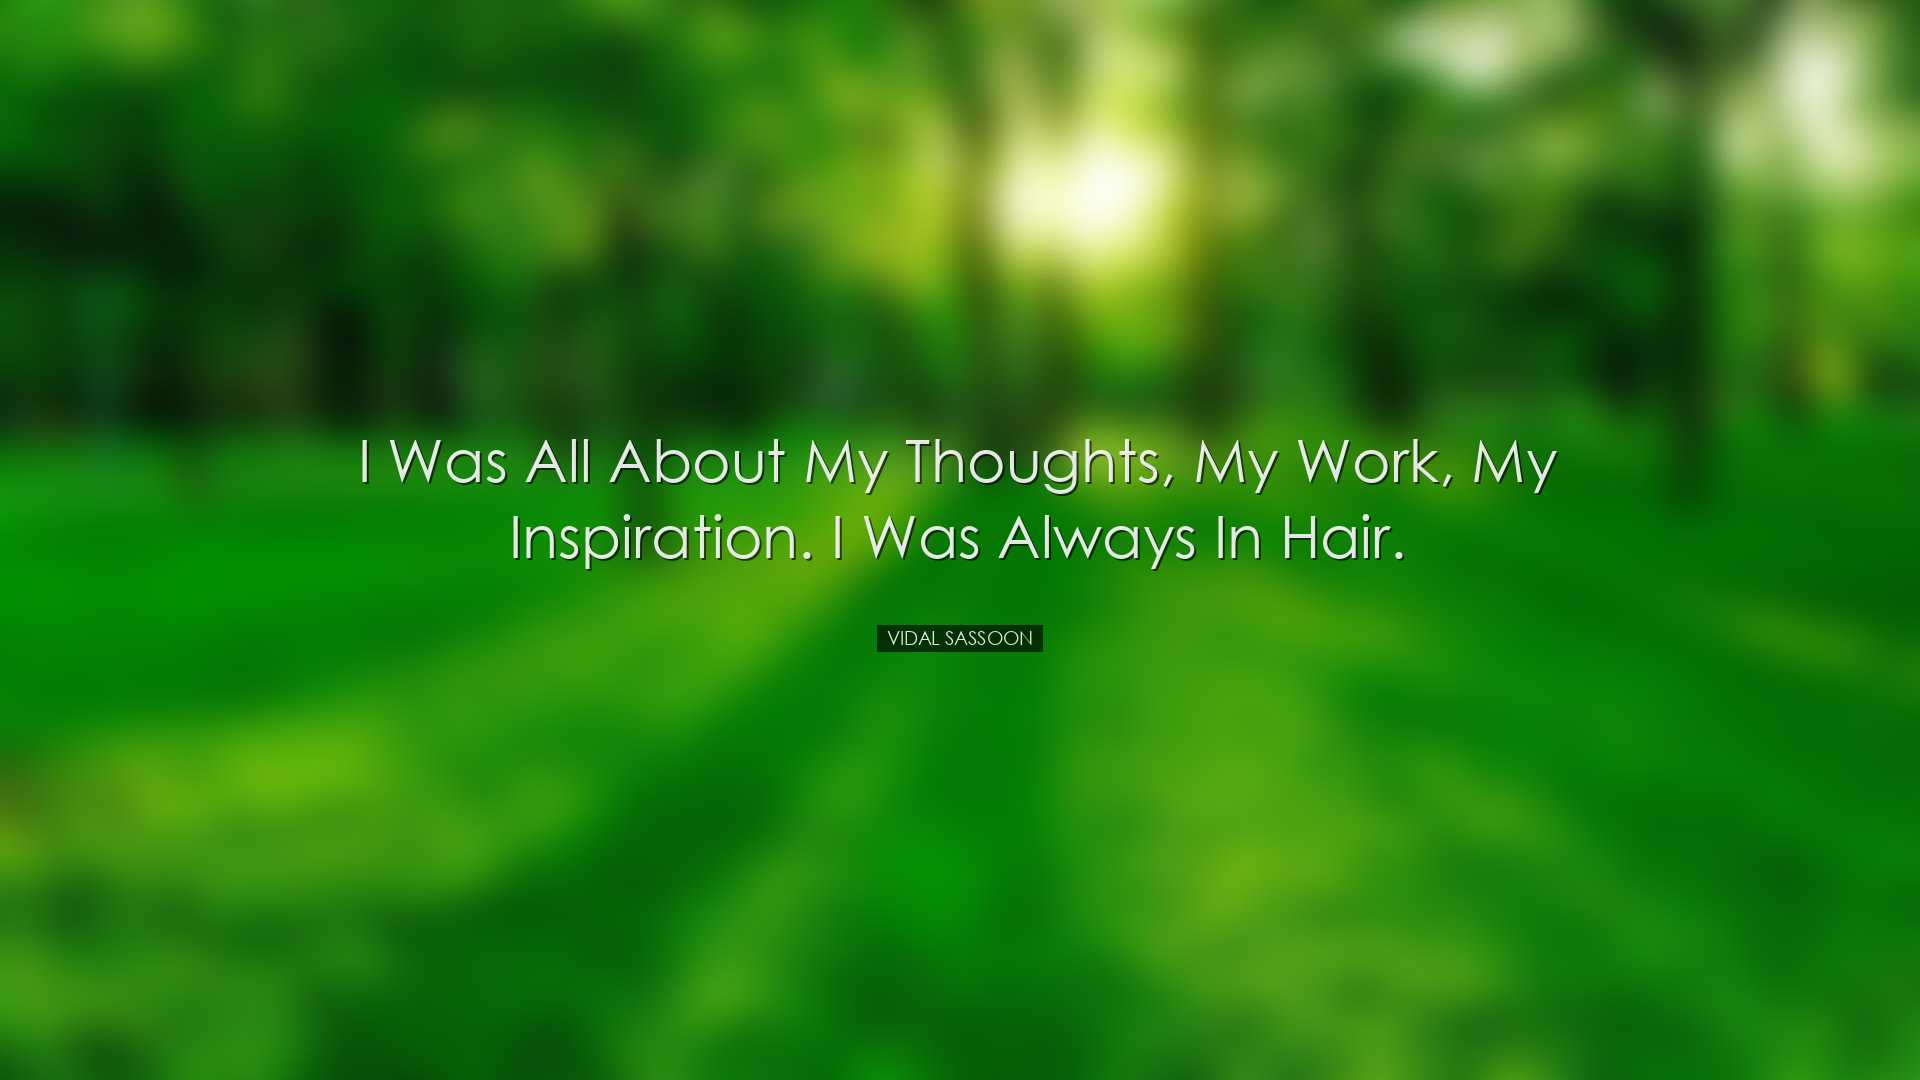 I was all about my thoughts, my work, my inspiration. I was always